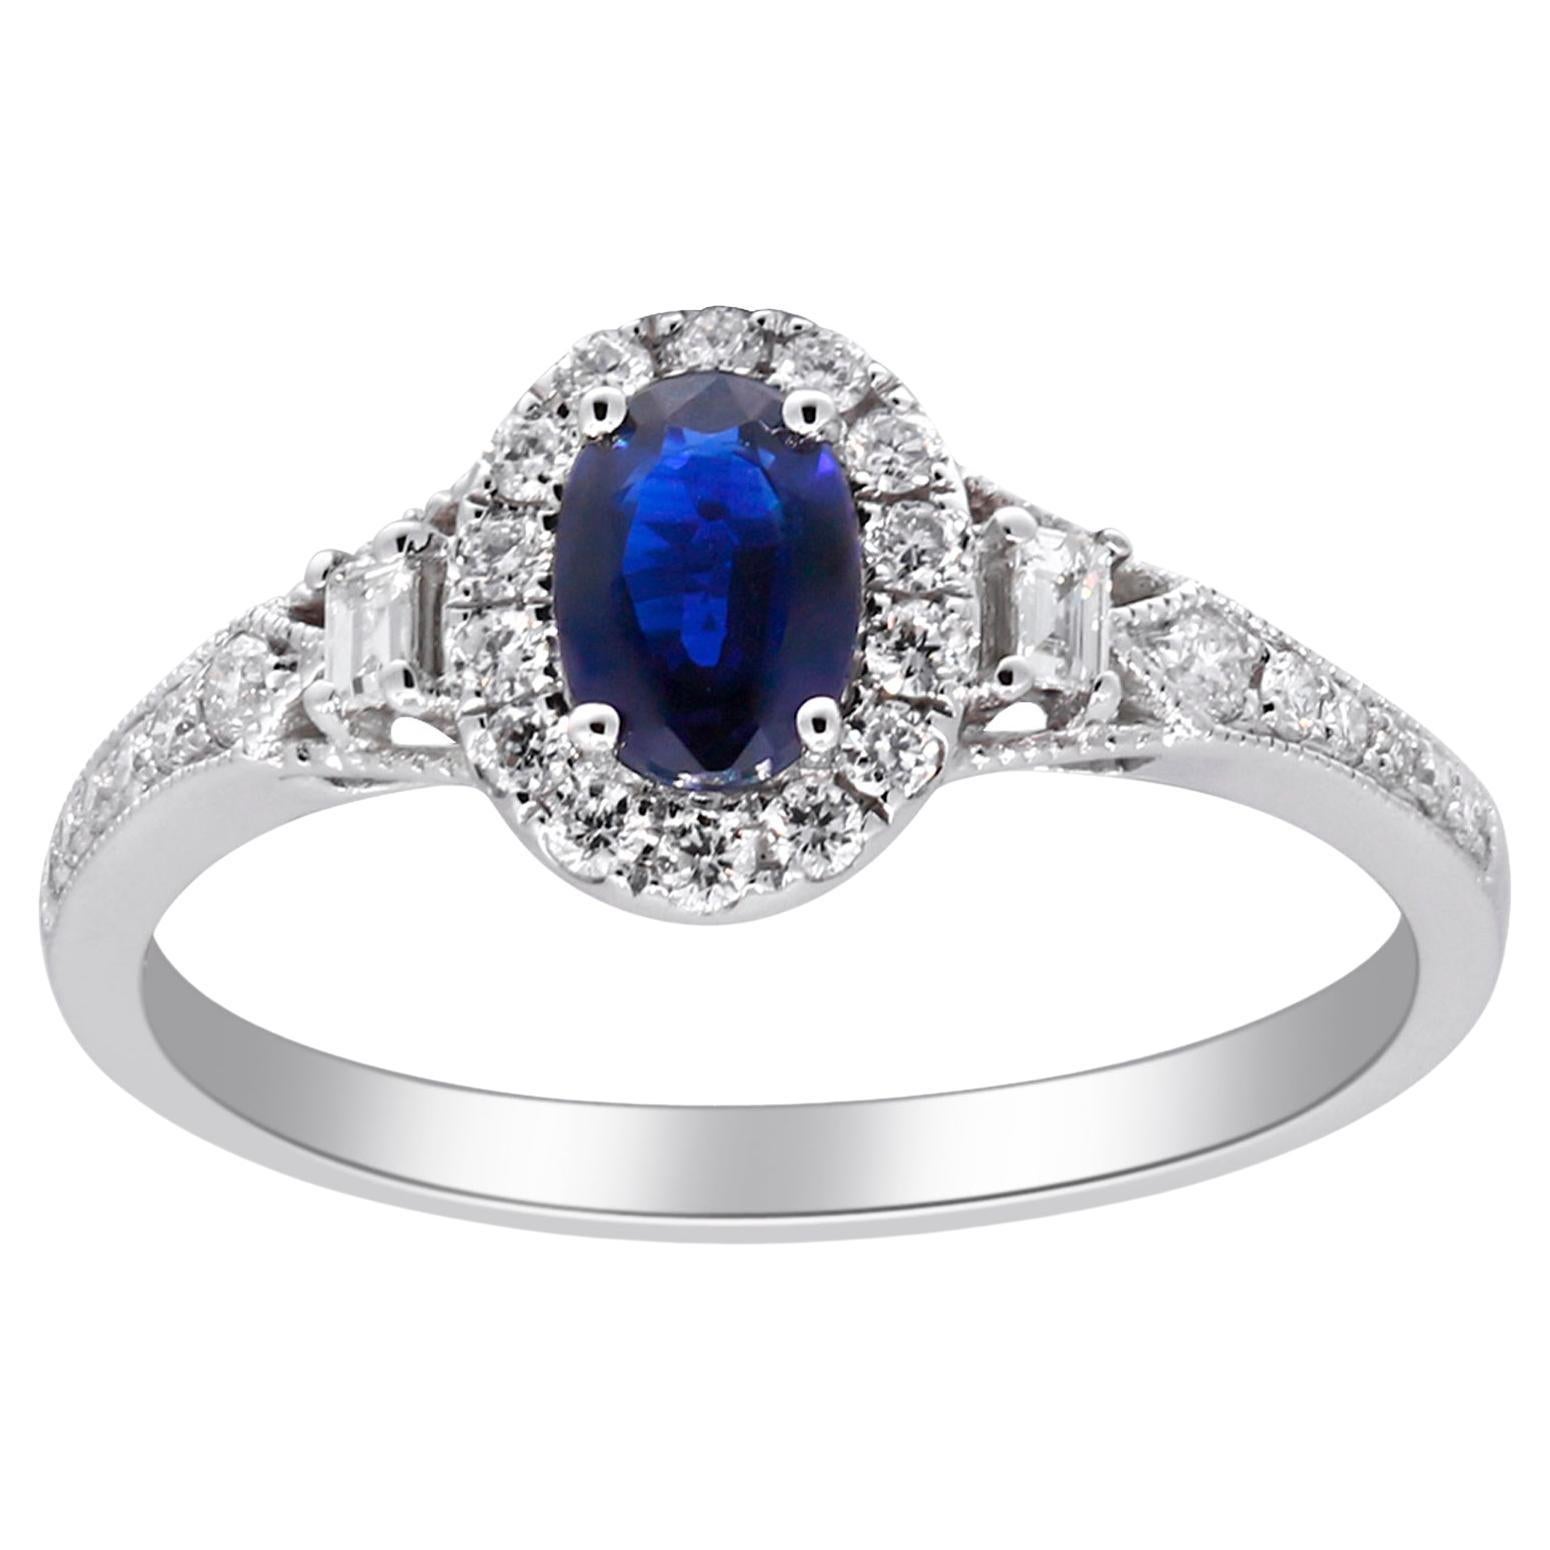 0.58 Carat Oval-Cut Blue Sapphire with Diamond Accents 14K White Gold Ring For Sale